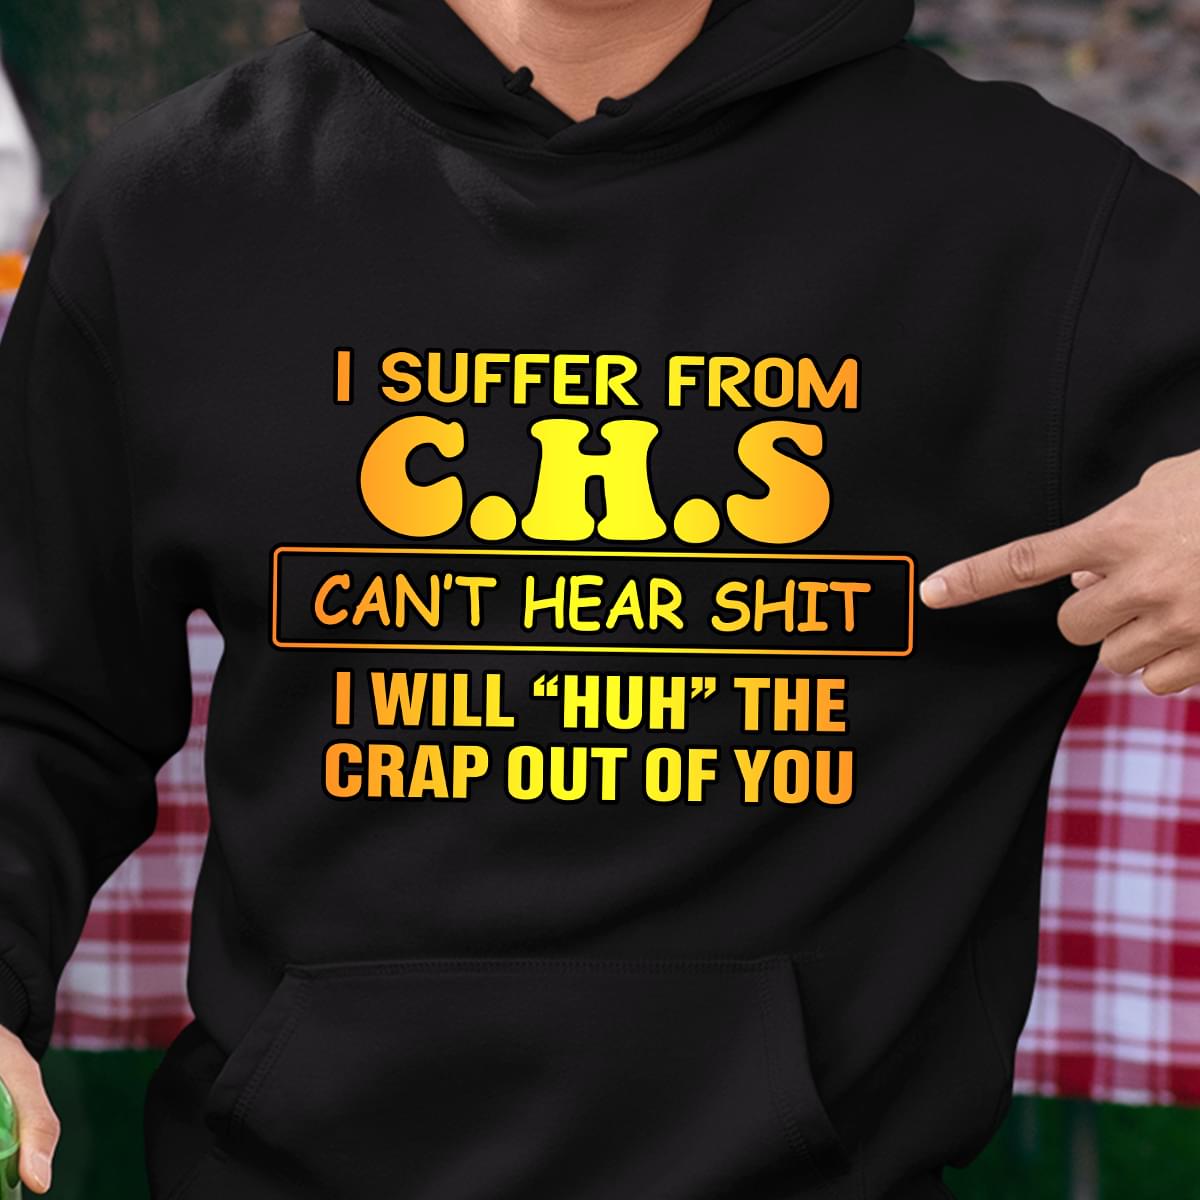 I Suffer From C.H.S Can't Hear Shit I Will "HUH" The Crap Out Of You